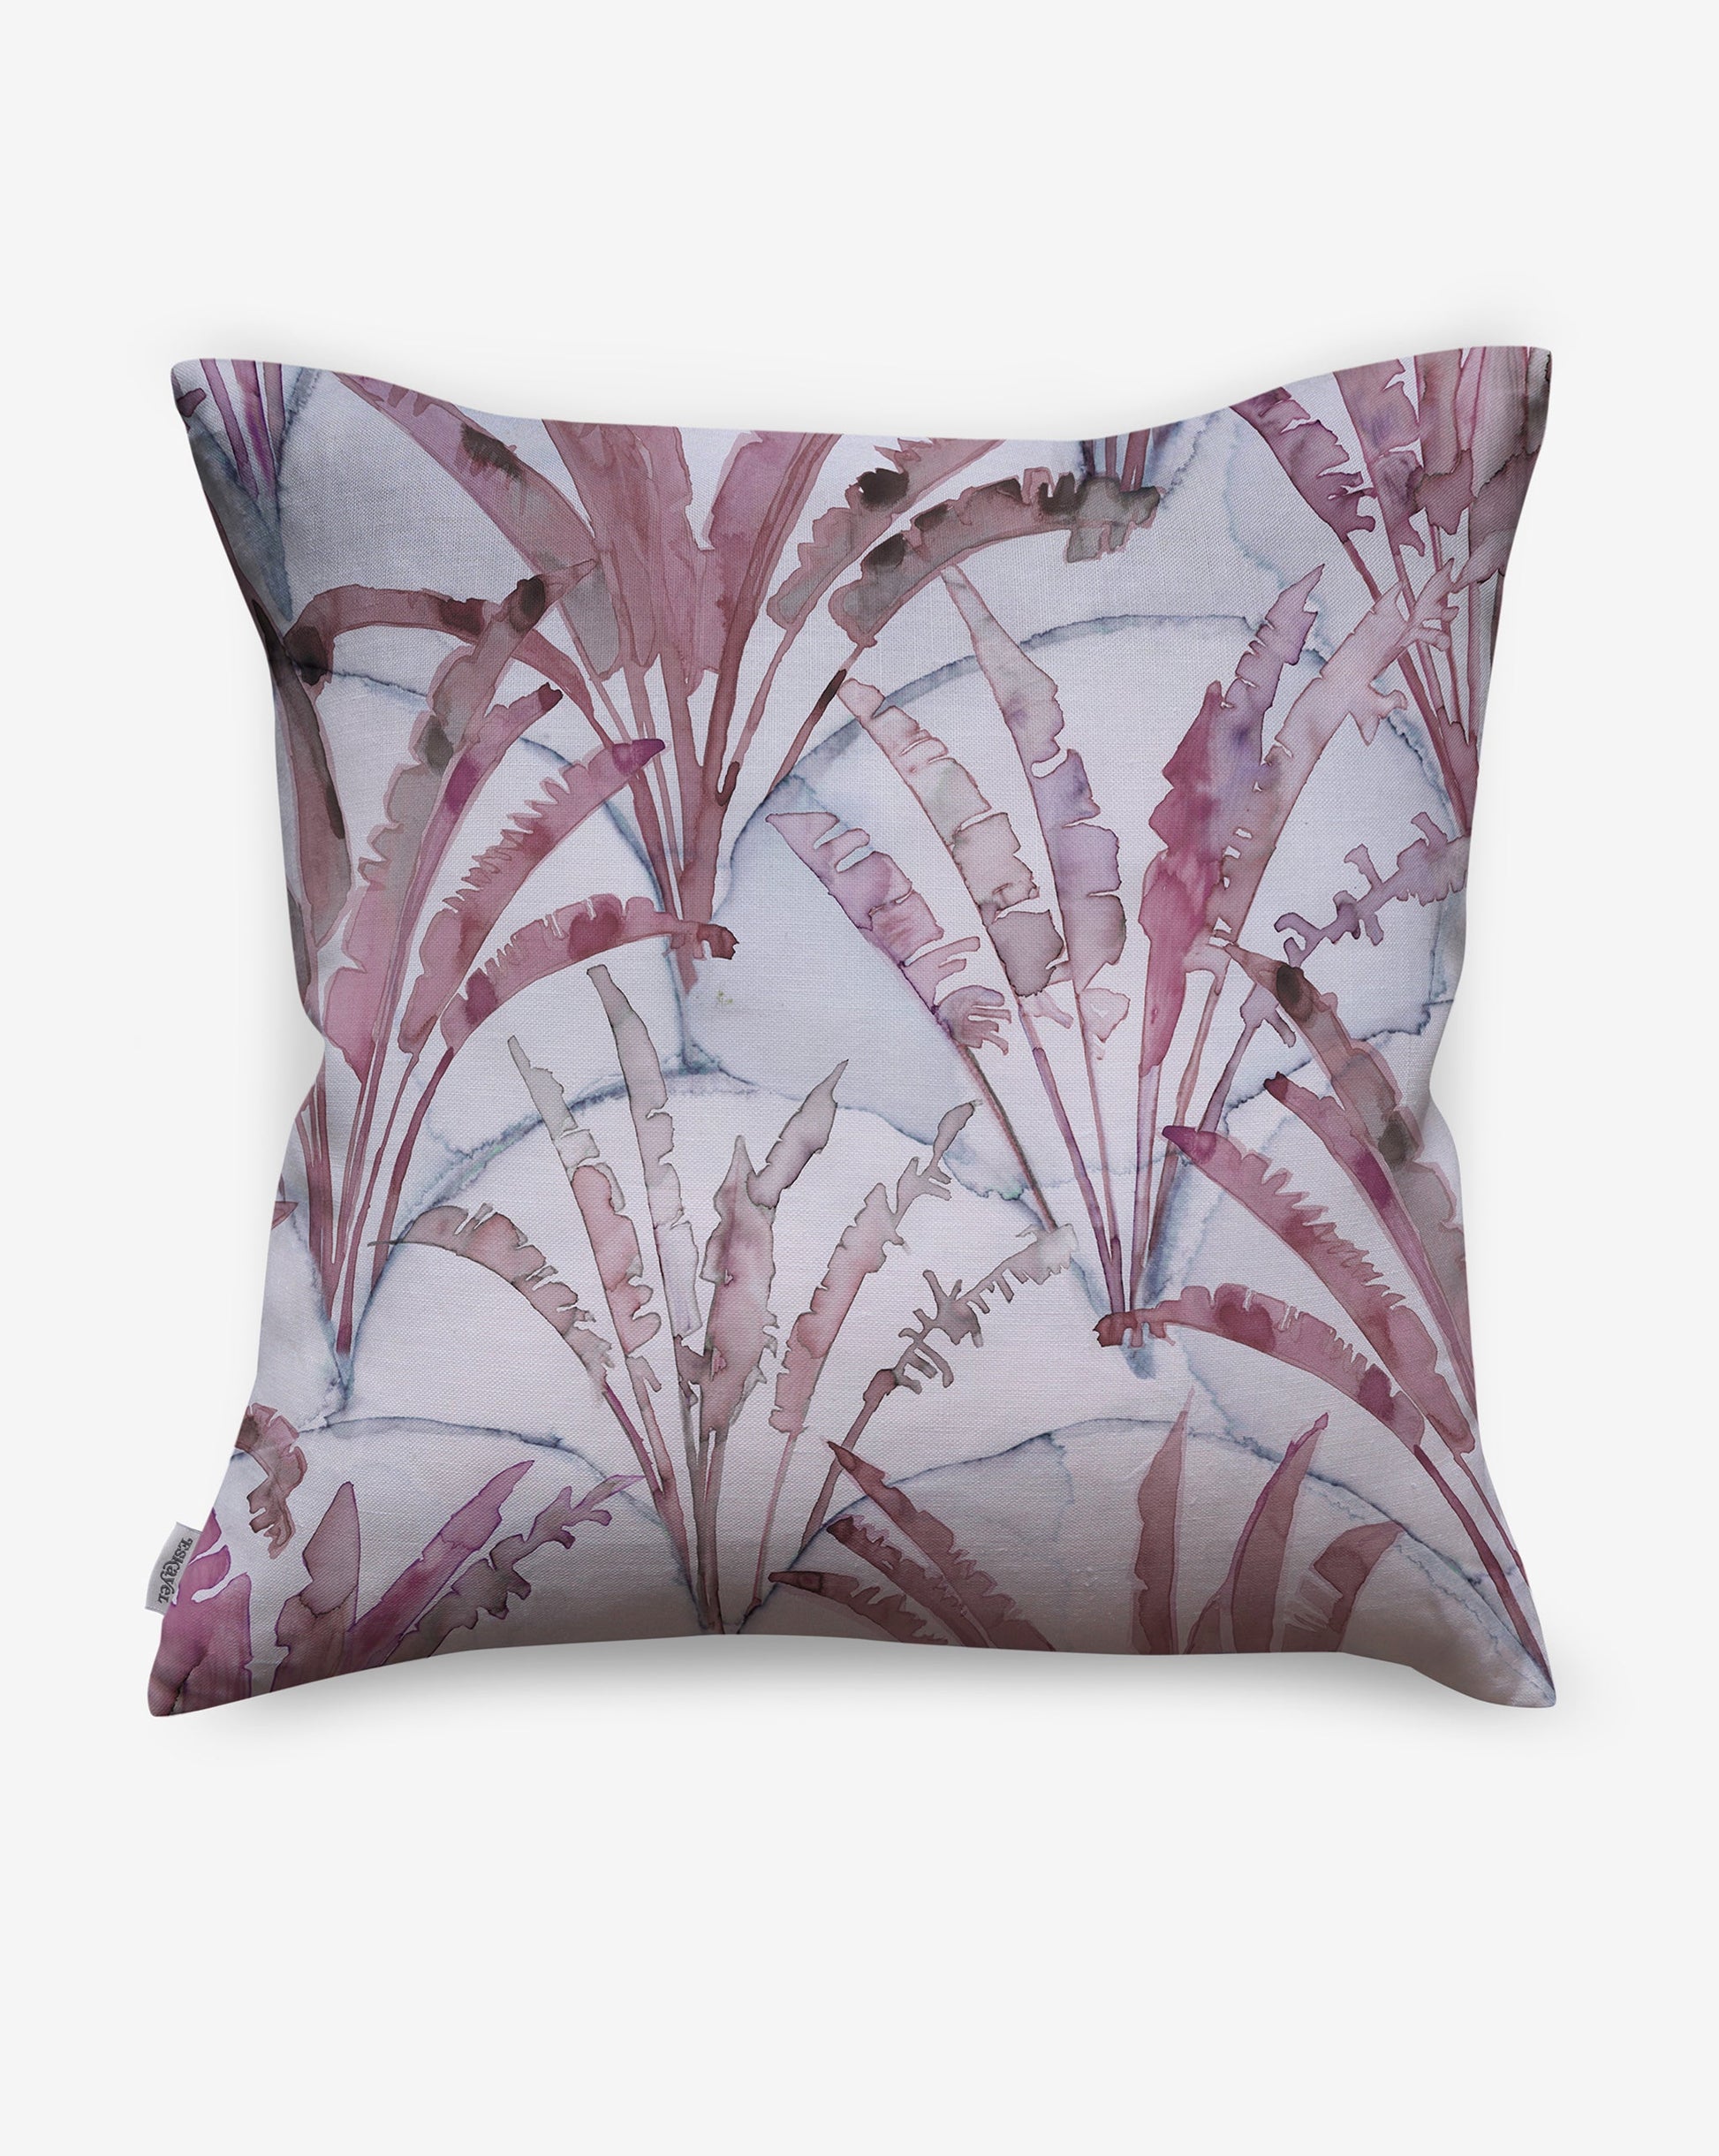 Displaying palms on a geometric scallop backdrop, Travelers Palm pillows in Pomegranate use a palette of magenta and light grey.